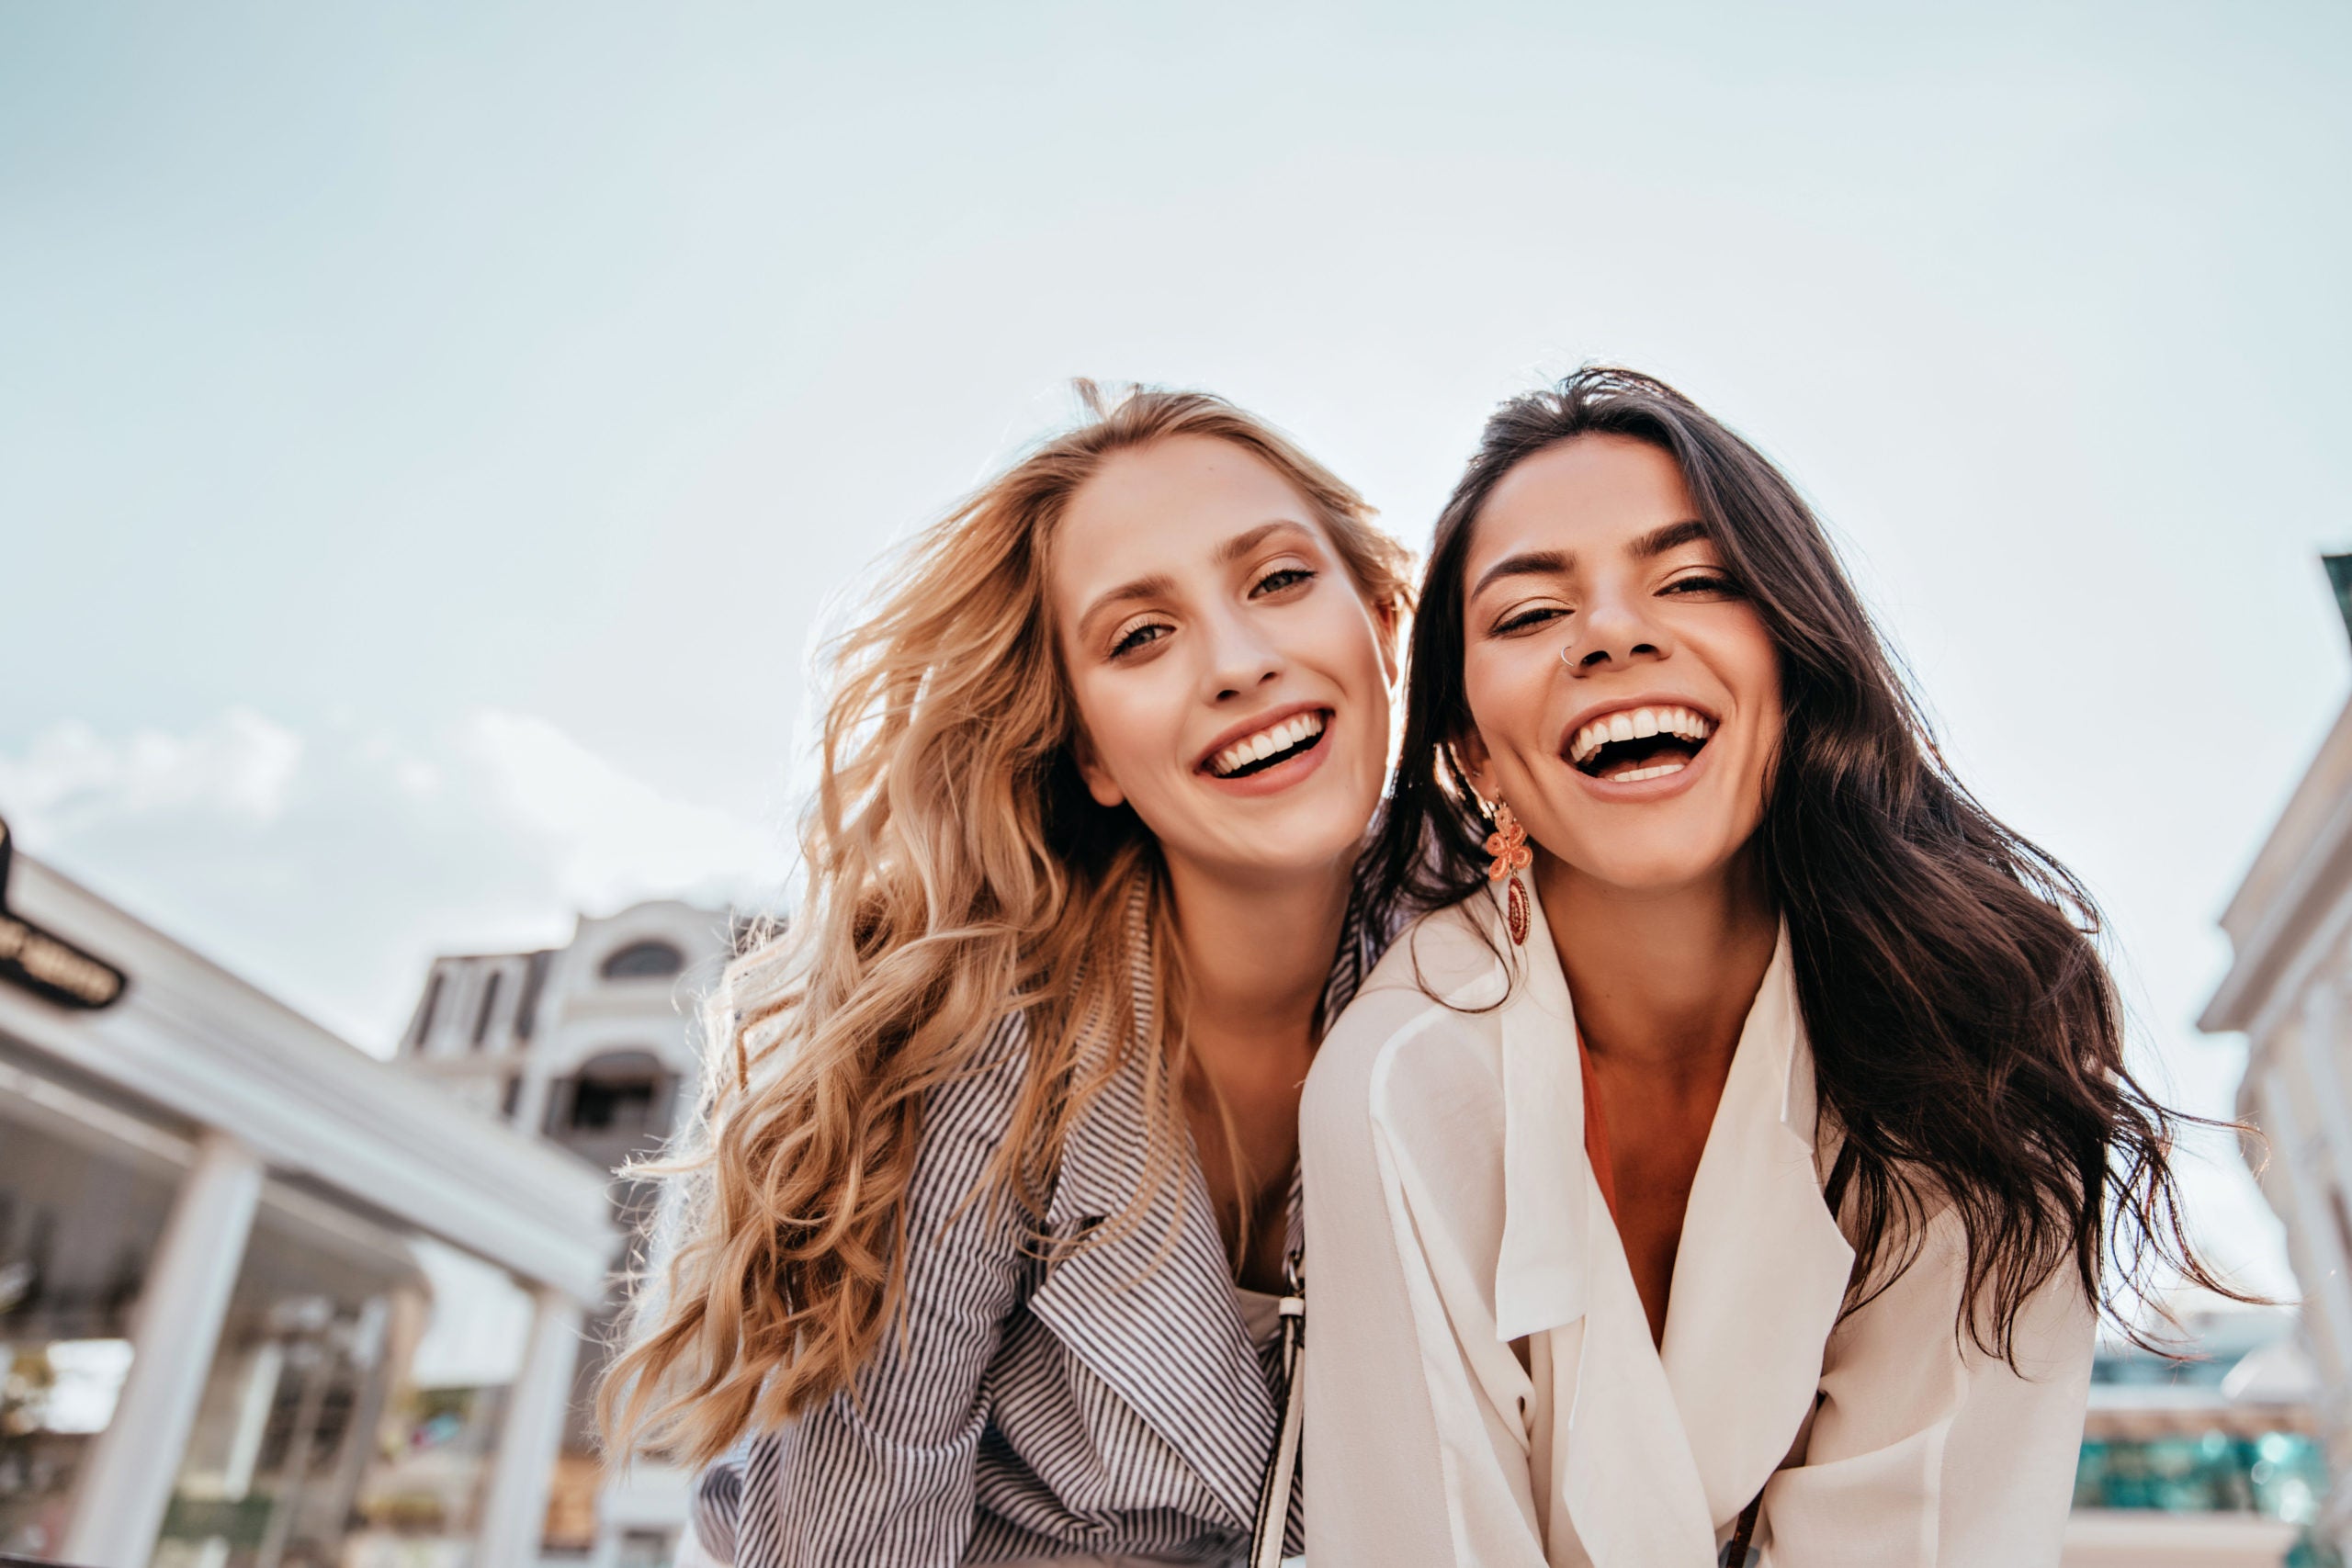 a midshot of two female friends laughing and smiling outdoors in the city